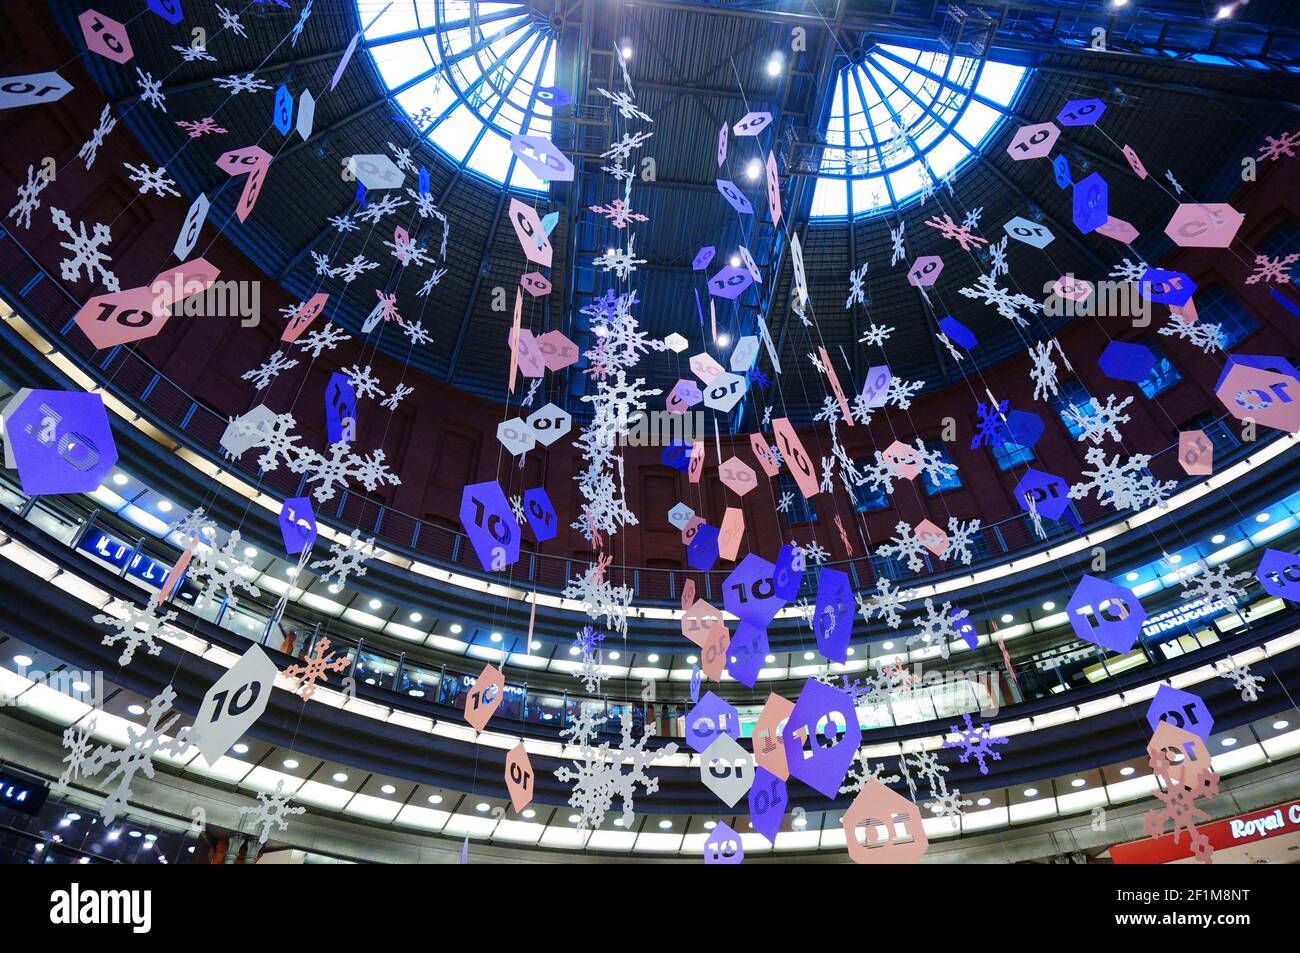 POZNAN, POLAND - Dec 01, 2013: Hanging decoration on a ceiling in the Stary Browar shopping ma Stock Photo